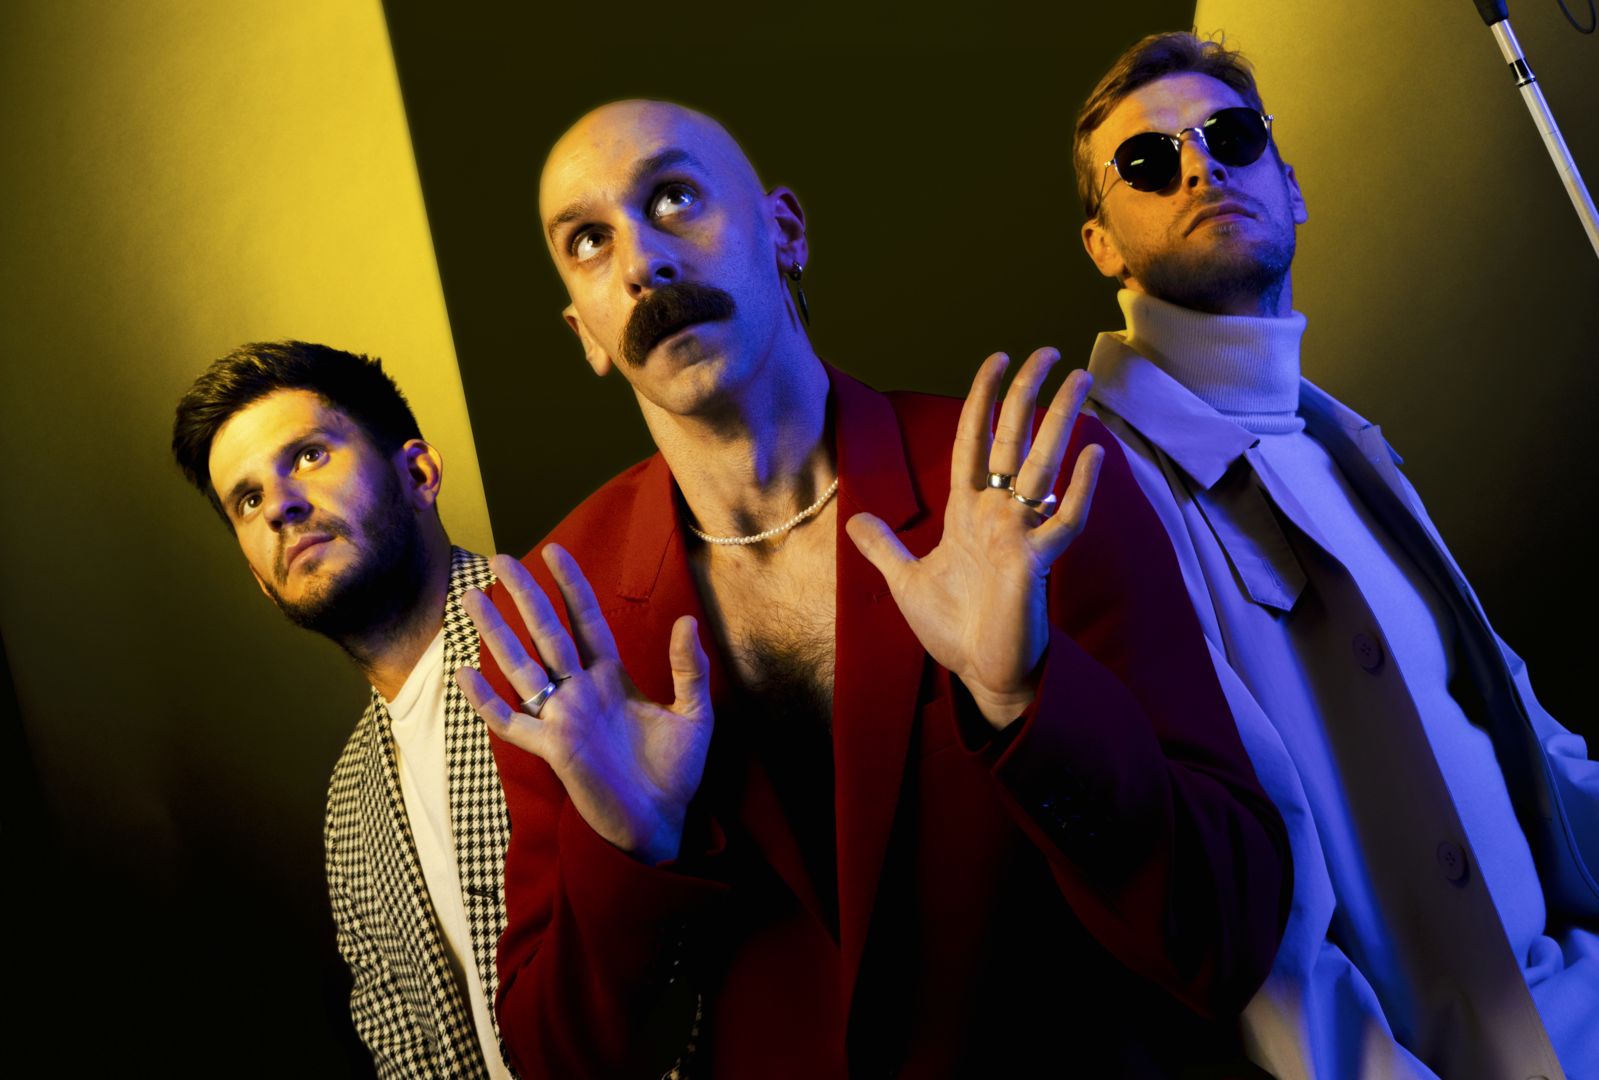 Alive At Five Starring X Ambassadors, Stamford, Connecticut, United States